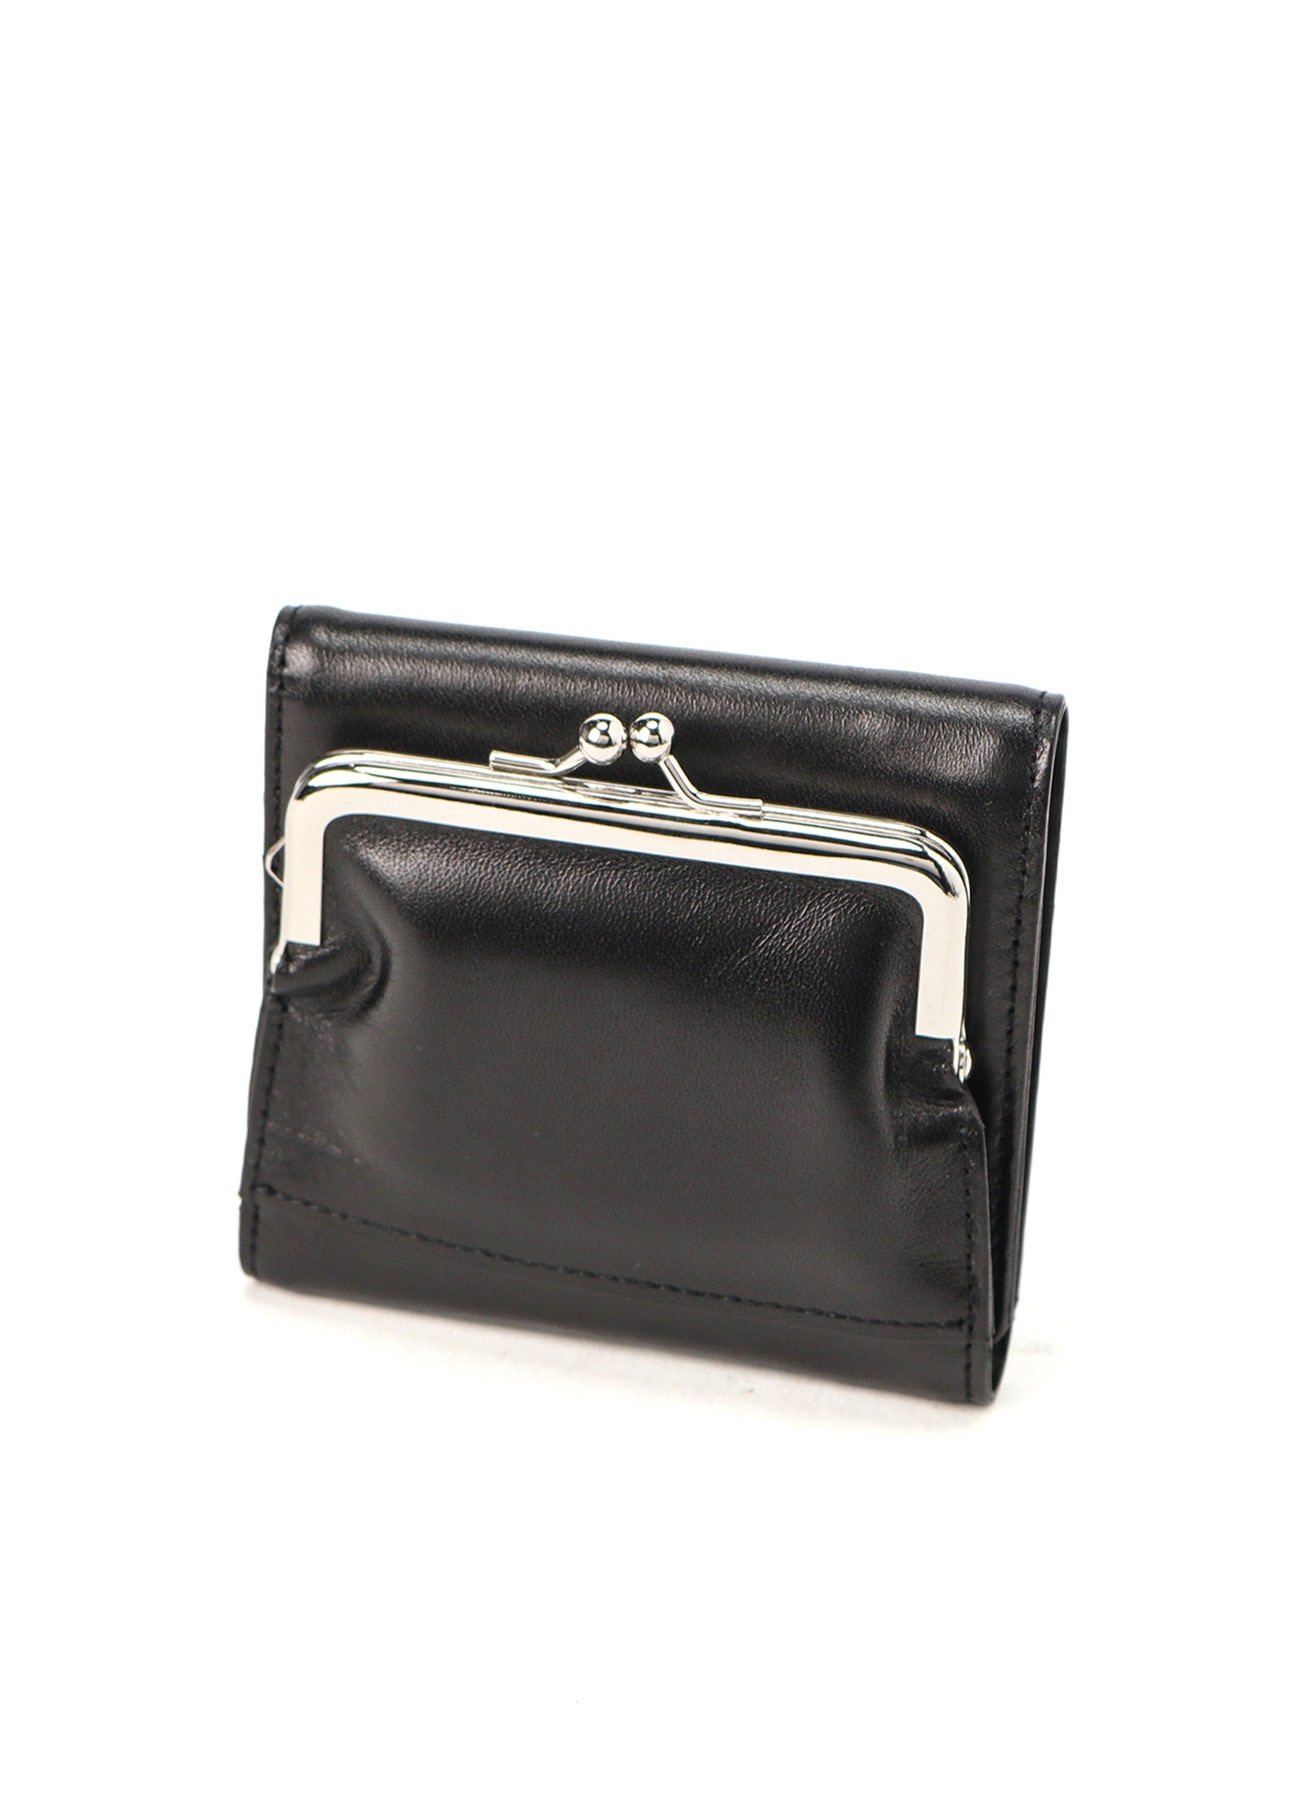 【7/26 12:00 Release】SEMI-GLOSS SMOOTH LEATHER MINI FOLDING WALLET